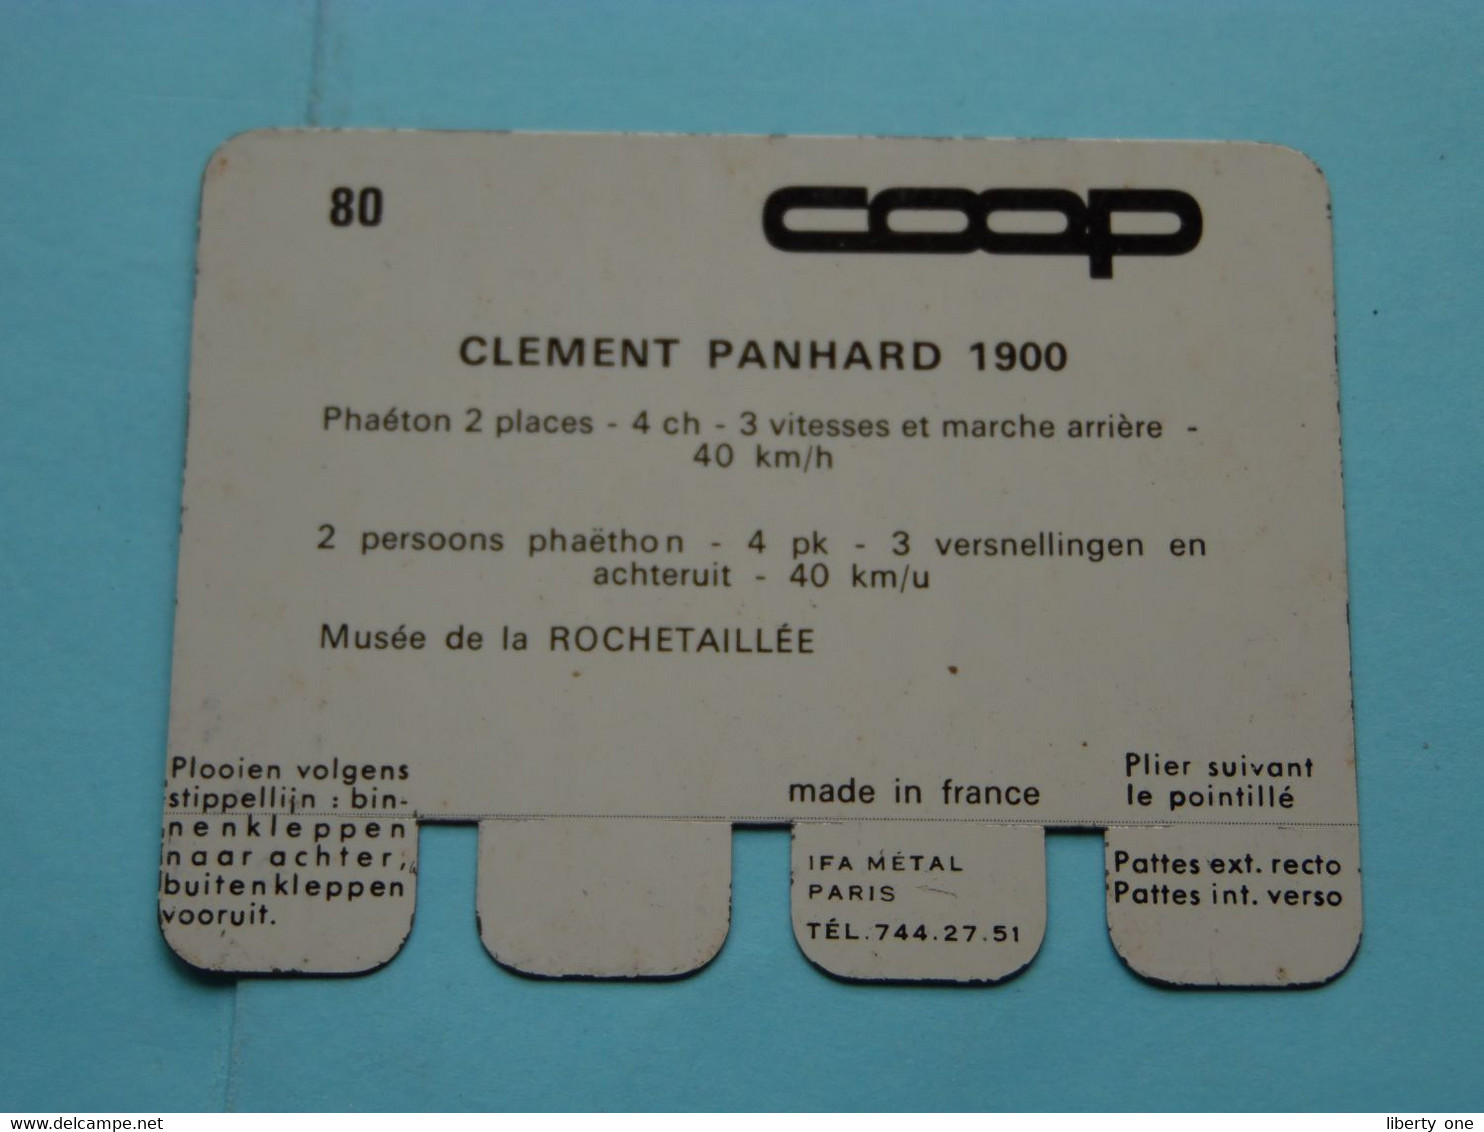 CLEMENT PANHARD 1900 - Coll. N° 80 NL/FR ( Plaquette C O O P - Voir Photo - IFA Metal Paris ) ! - Tin Signs (after1960)